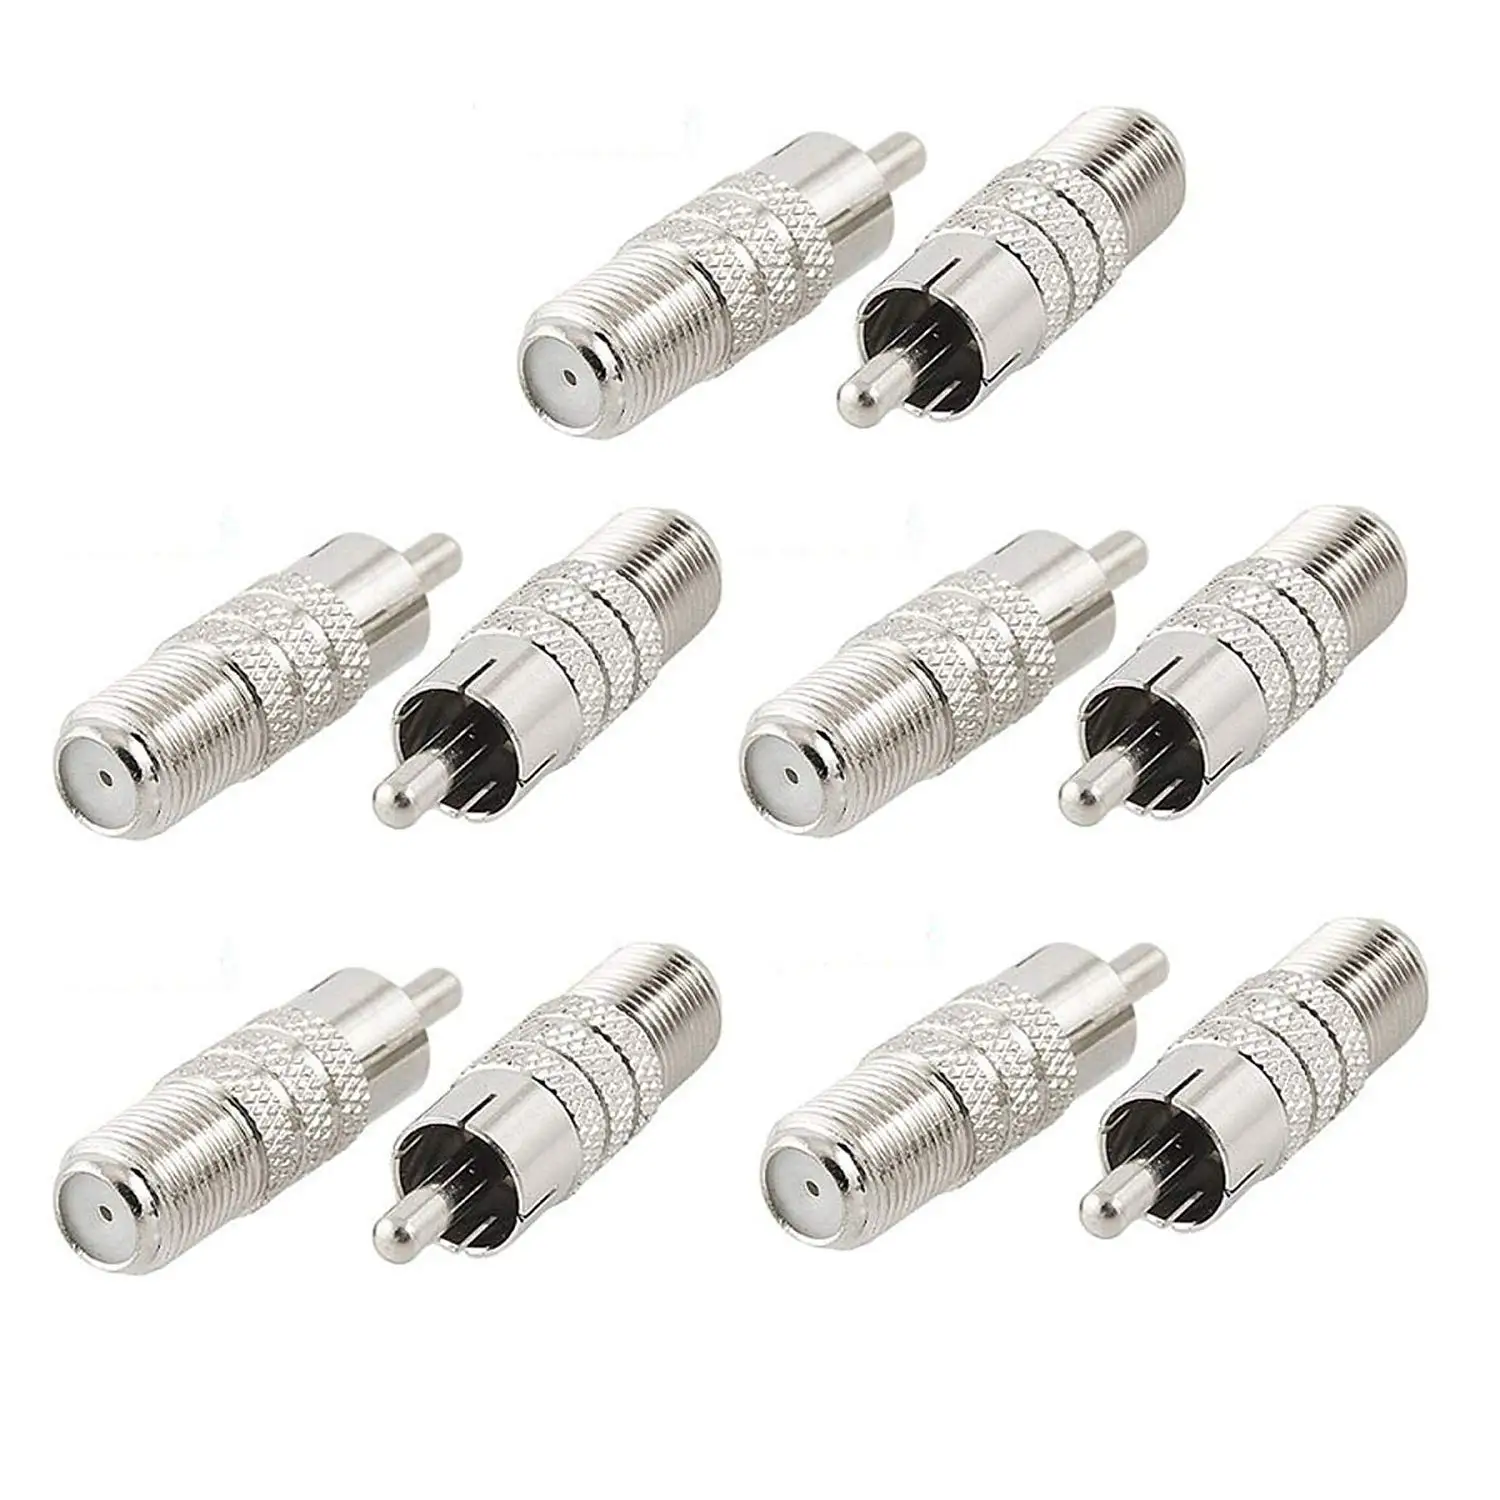 RG174 50 ohm BNC M to M  Coaxial Cable 3Ft /& Easy T-Con CCTV /& Video Sys 4Pack